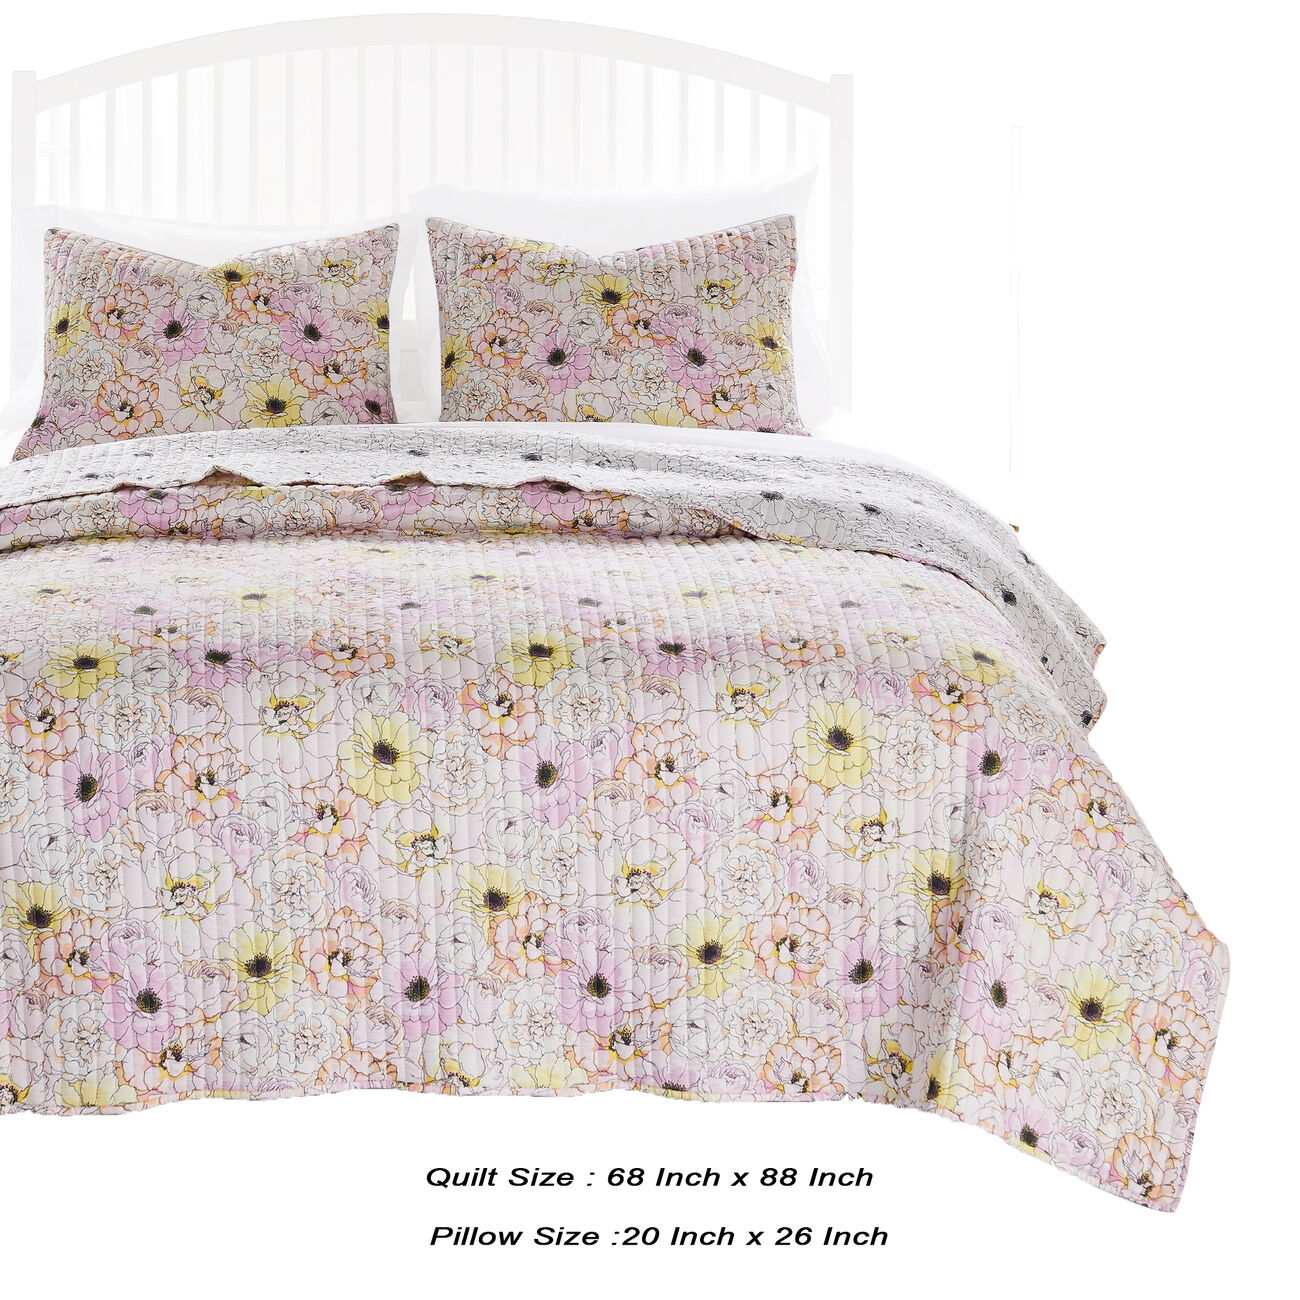 Milan 2 Piece Microfiber Blooming Flower Pattern Twin Quilt Set, White and Pink